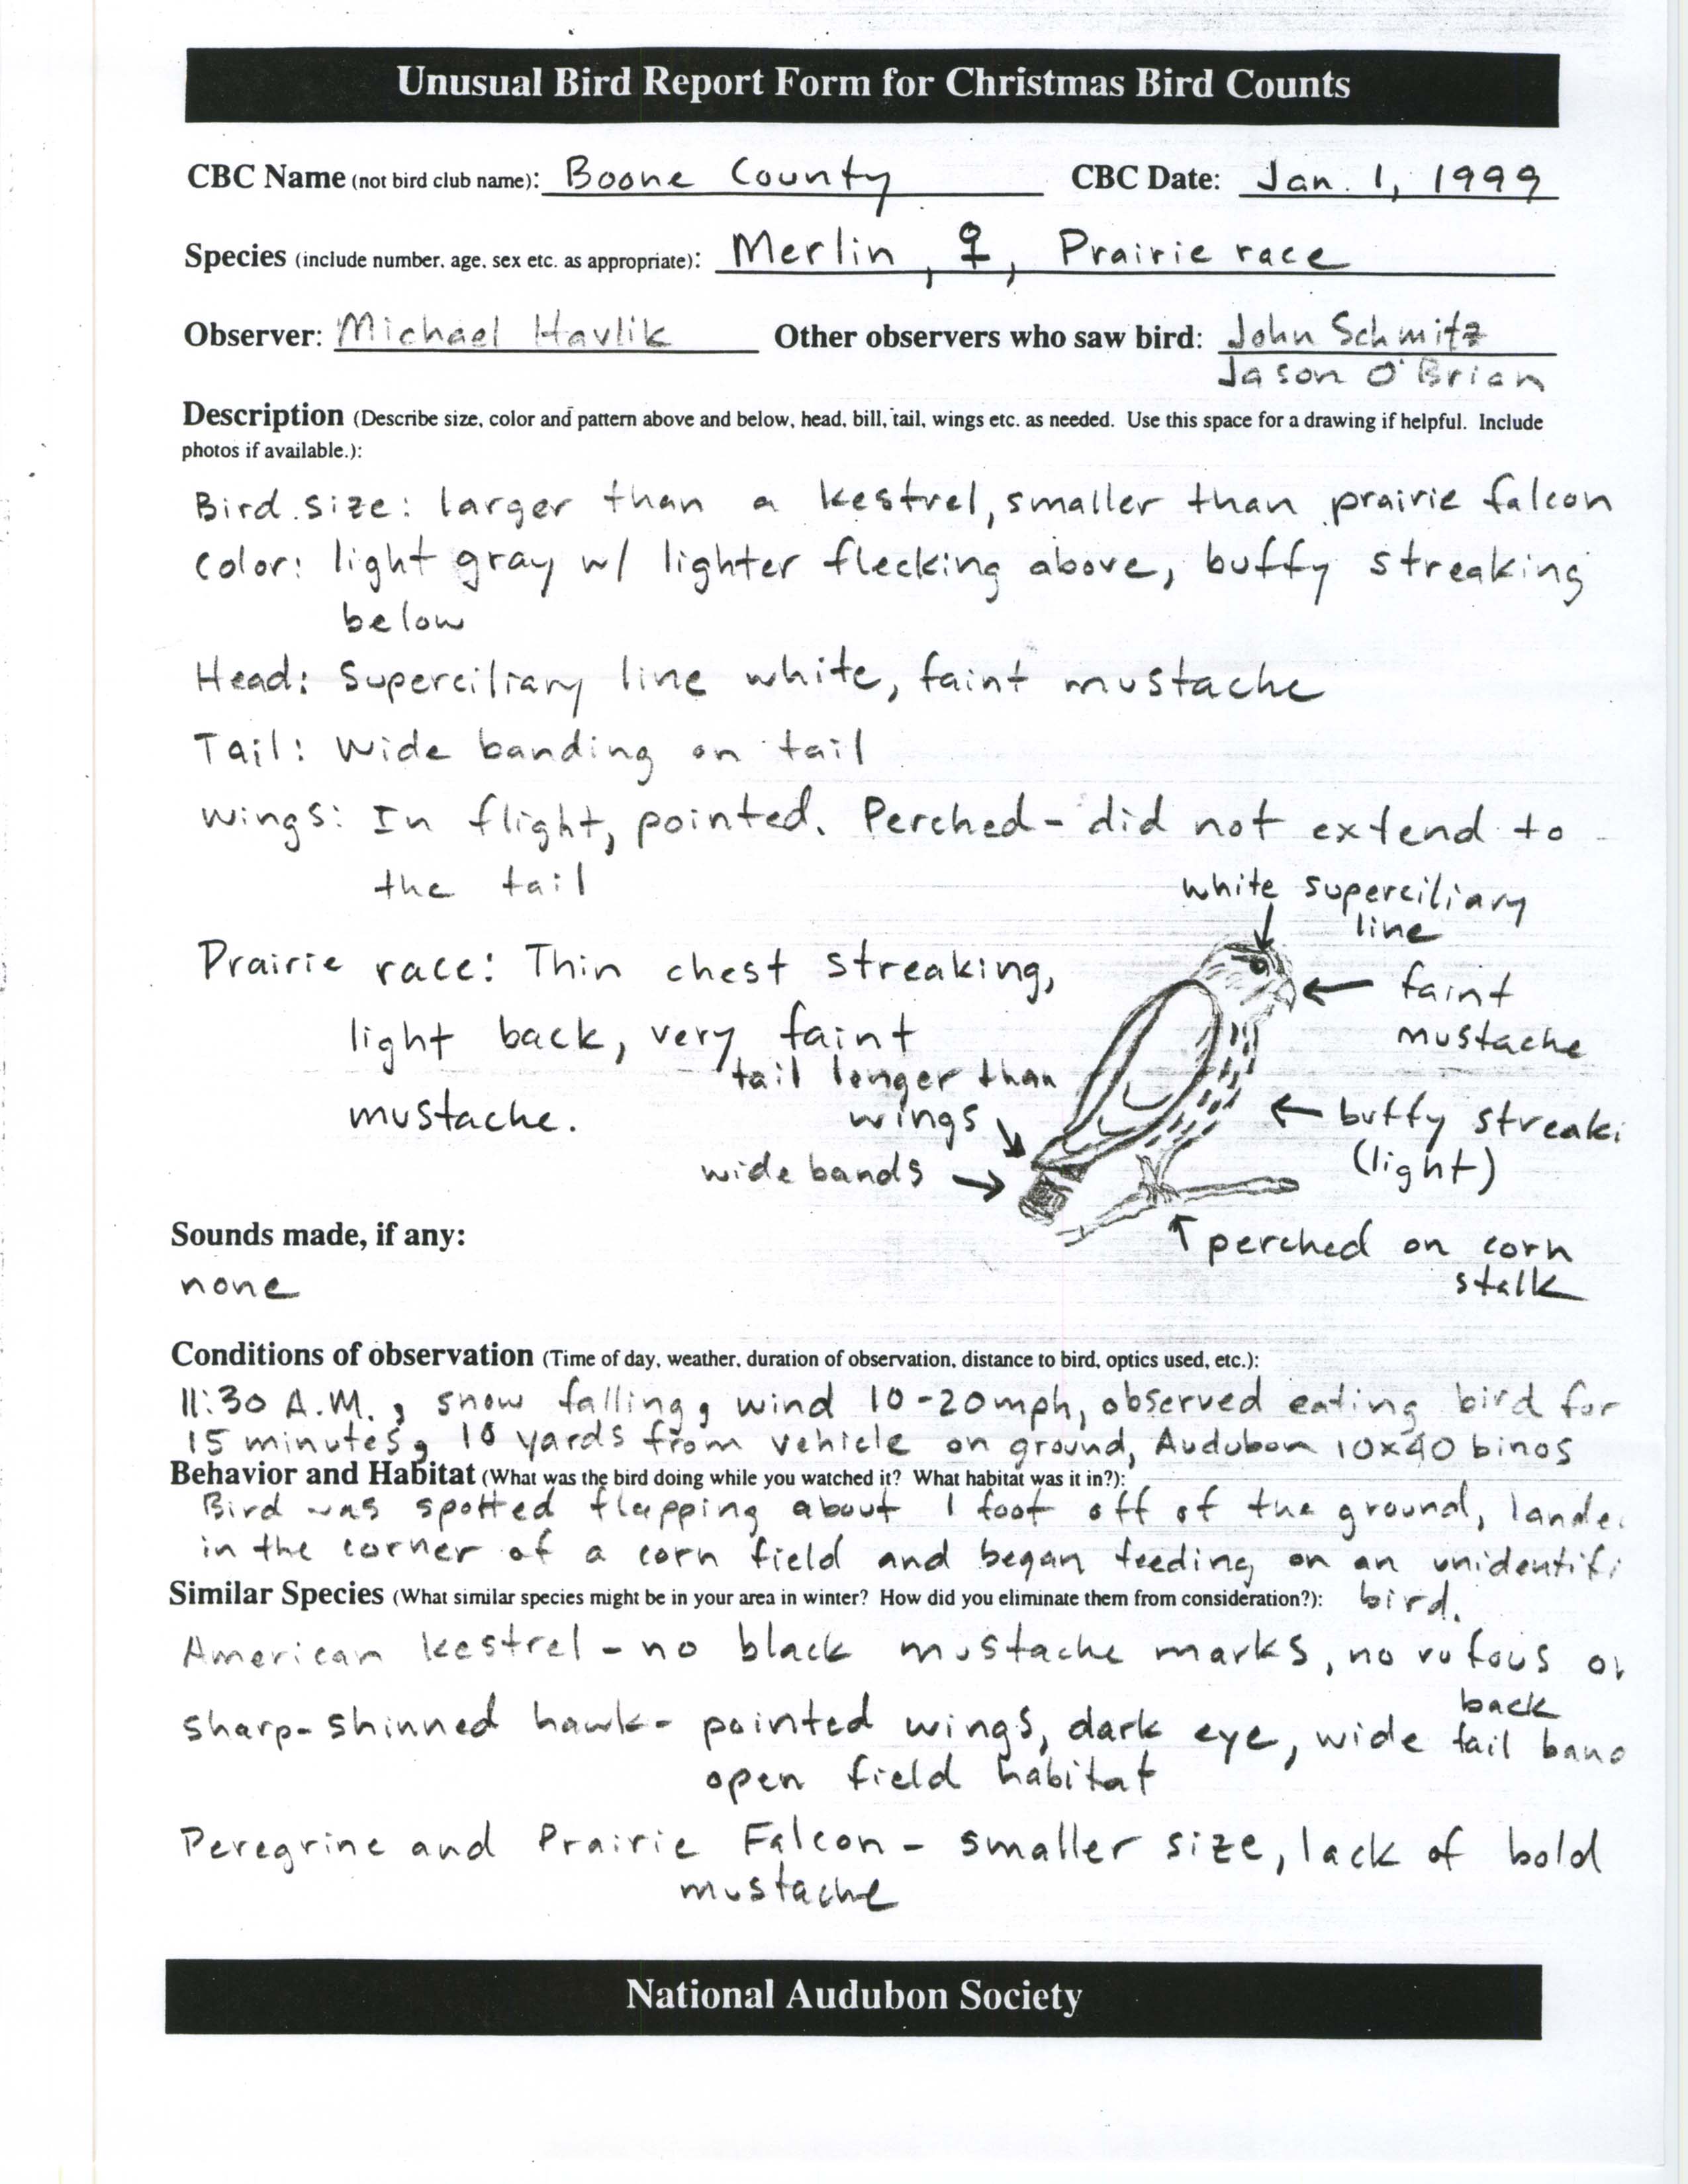 Rare bird documentation form for Merlin at Boone County, 1999